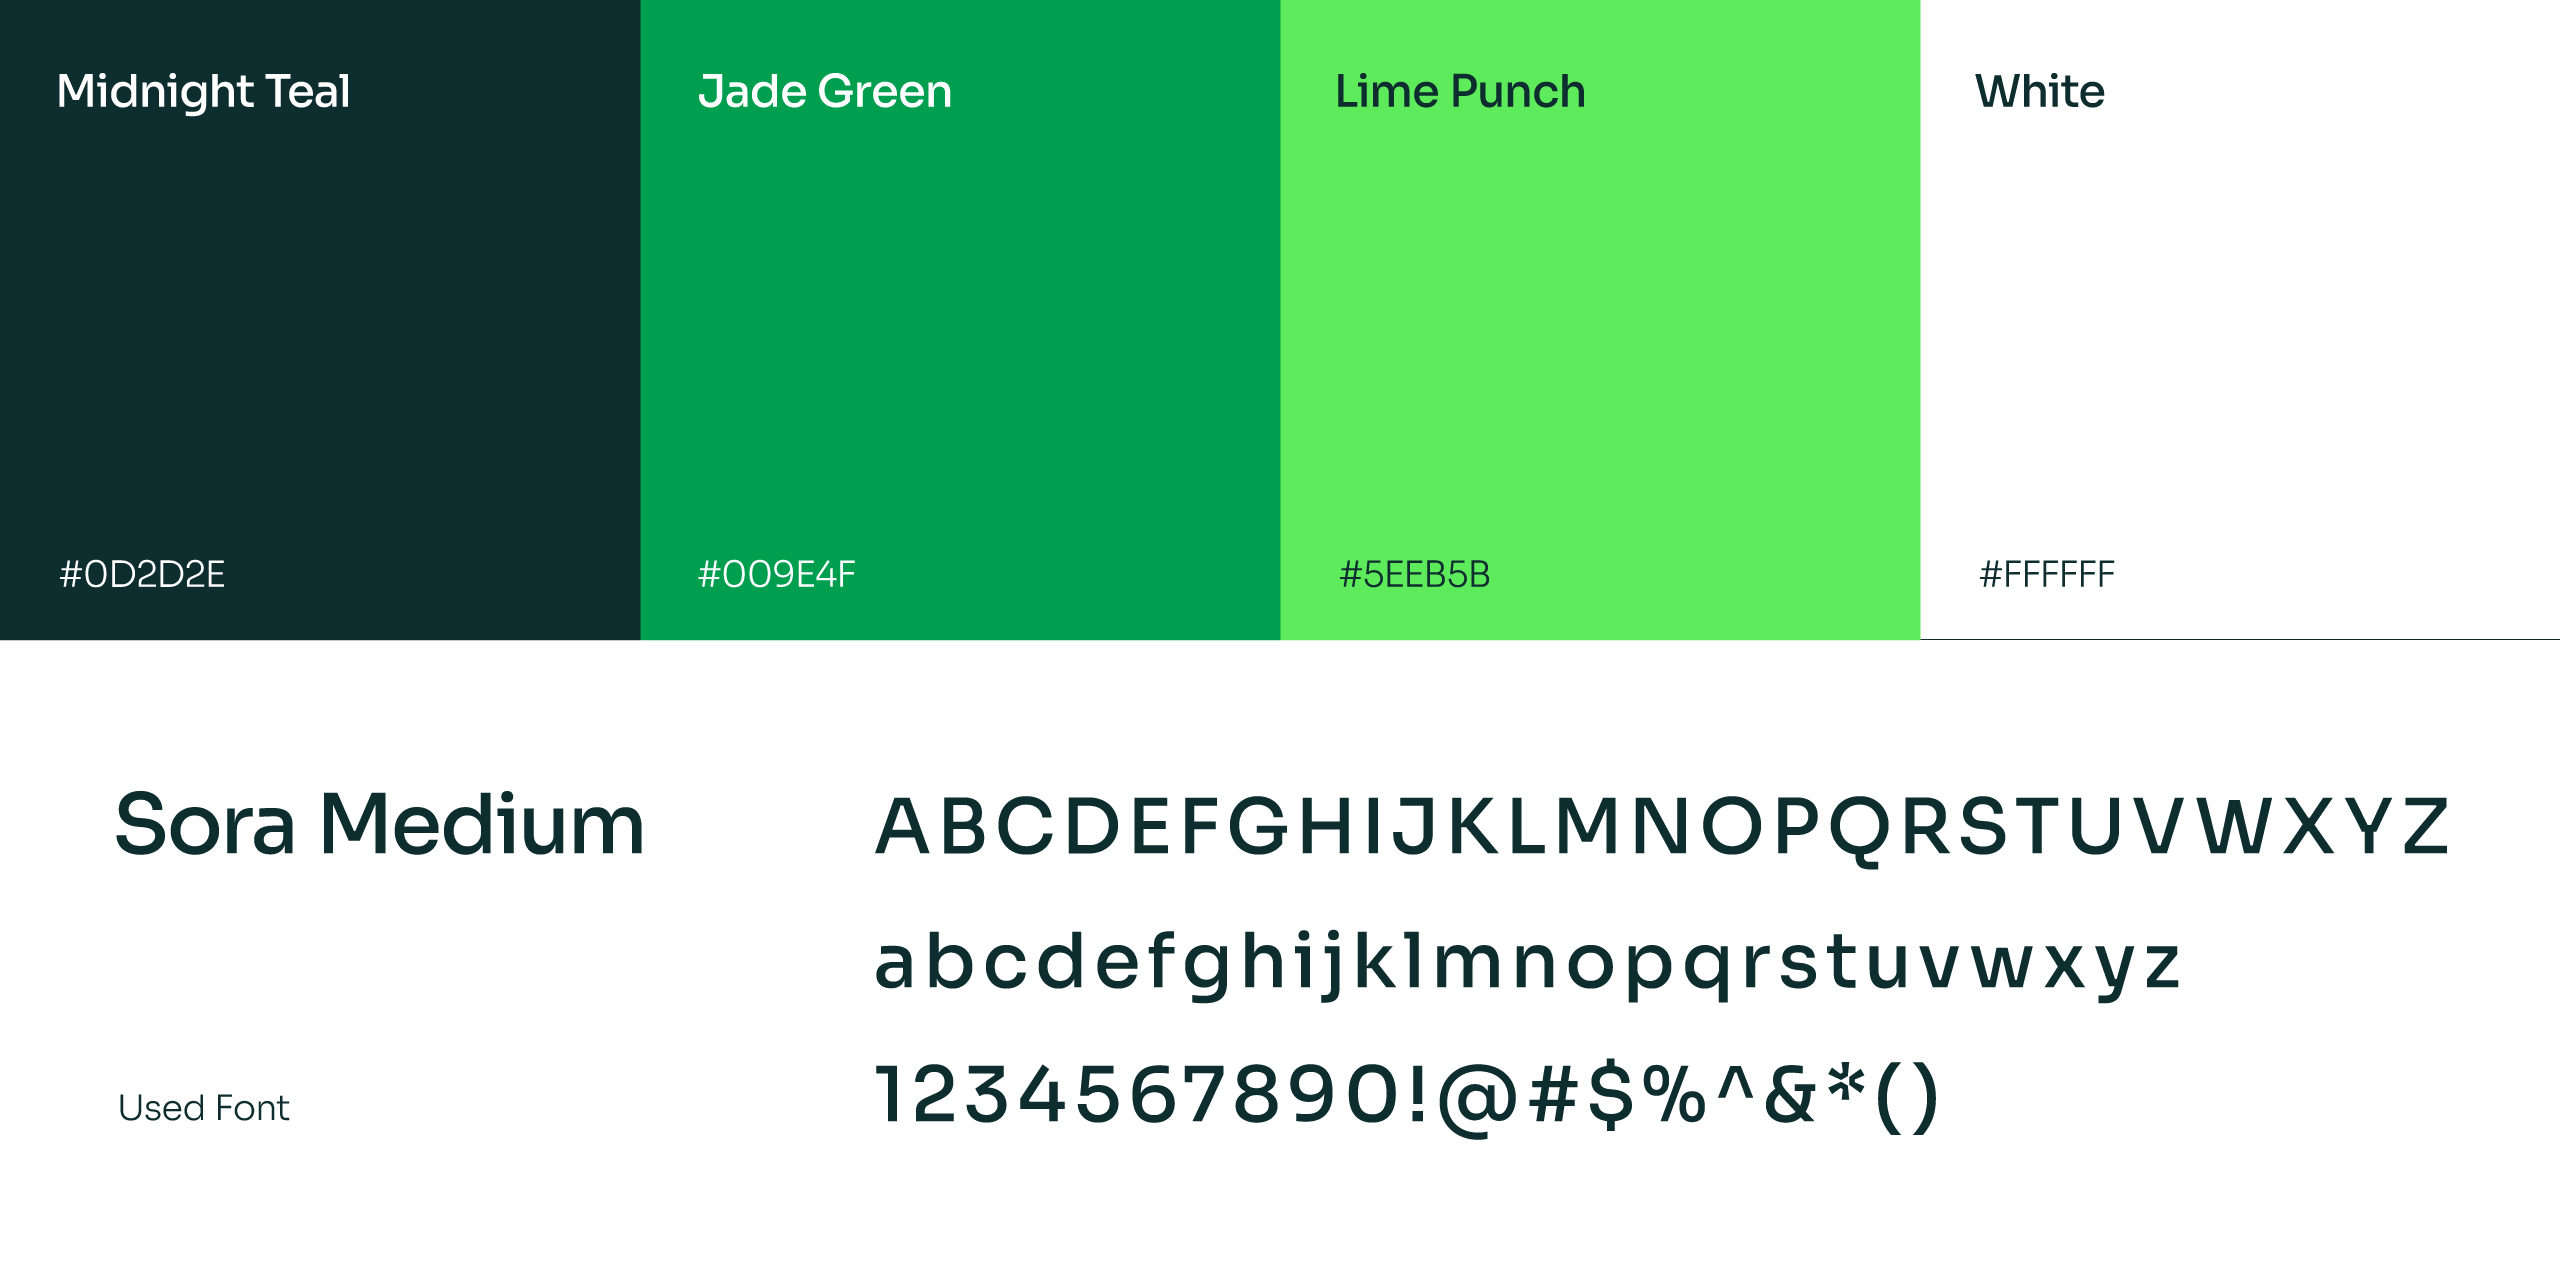 WasteTracker style guide featuring official colors and fonts for consistent branding.